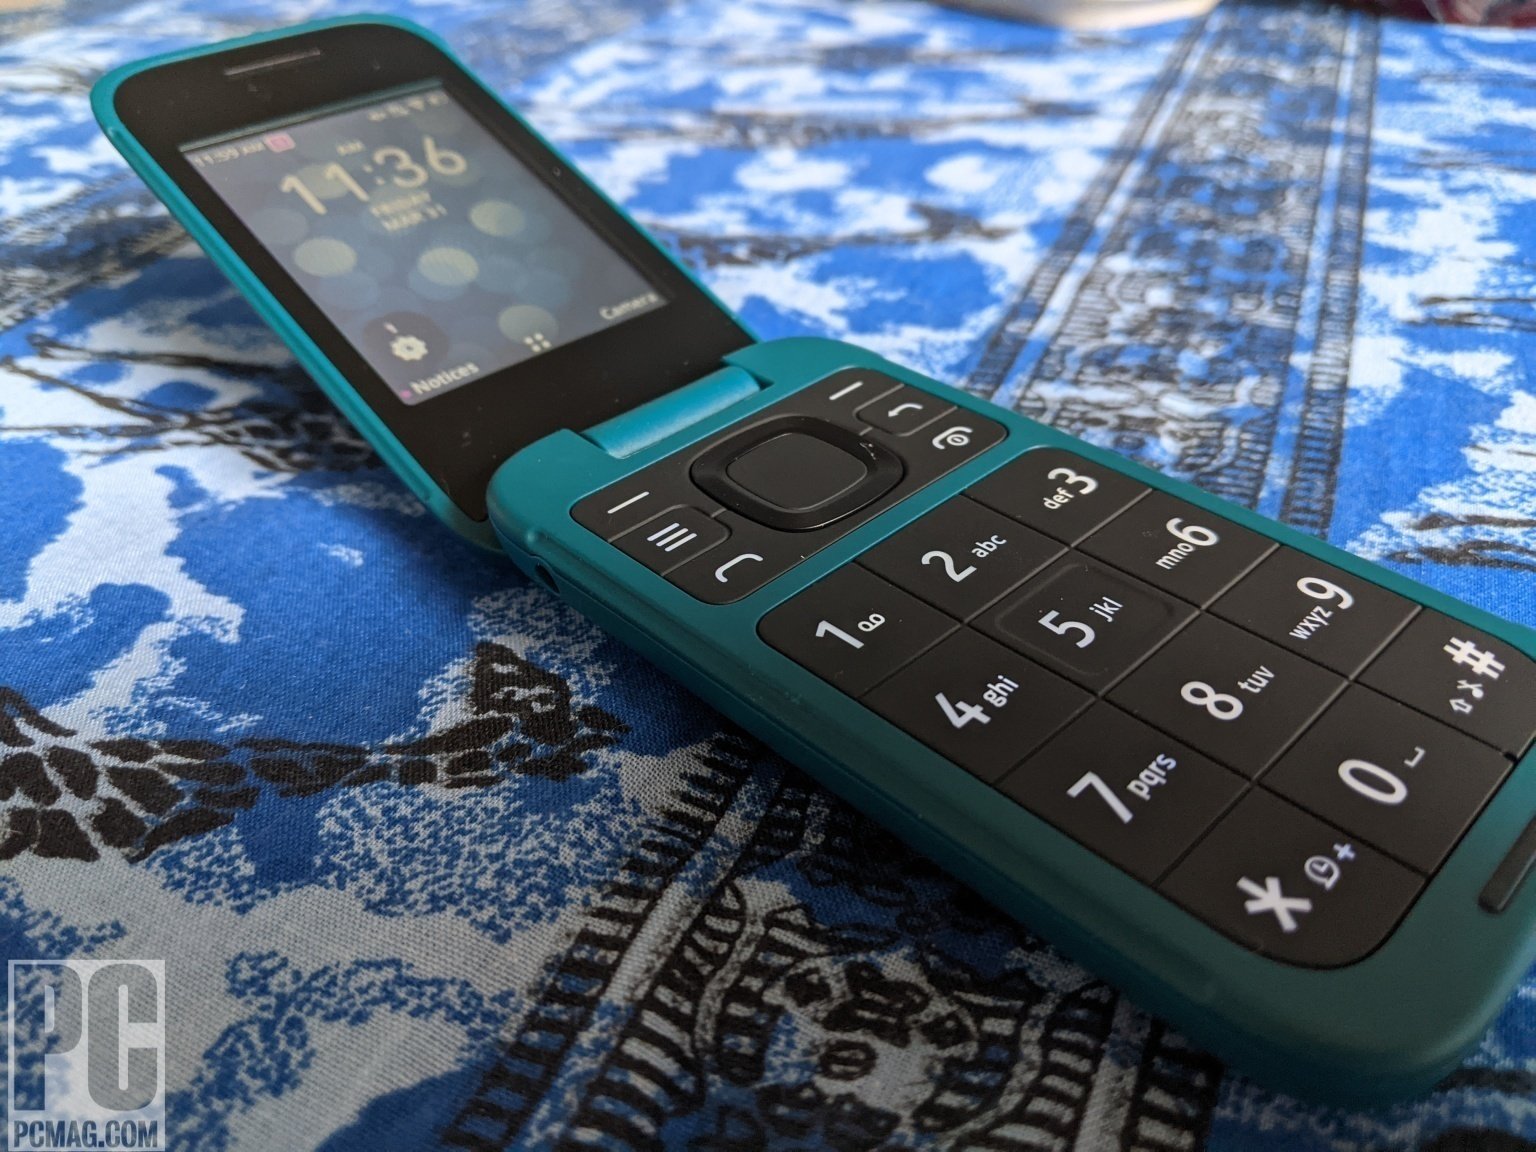 How To Add Contacts To A TCL Flip Phone | CellularNews